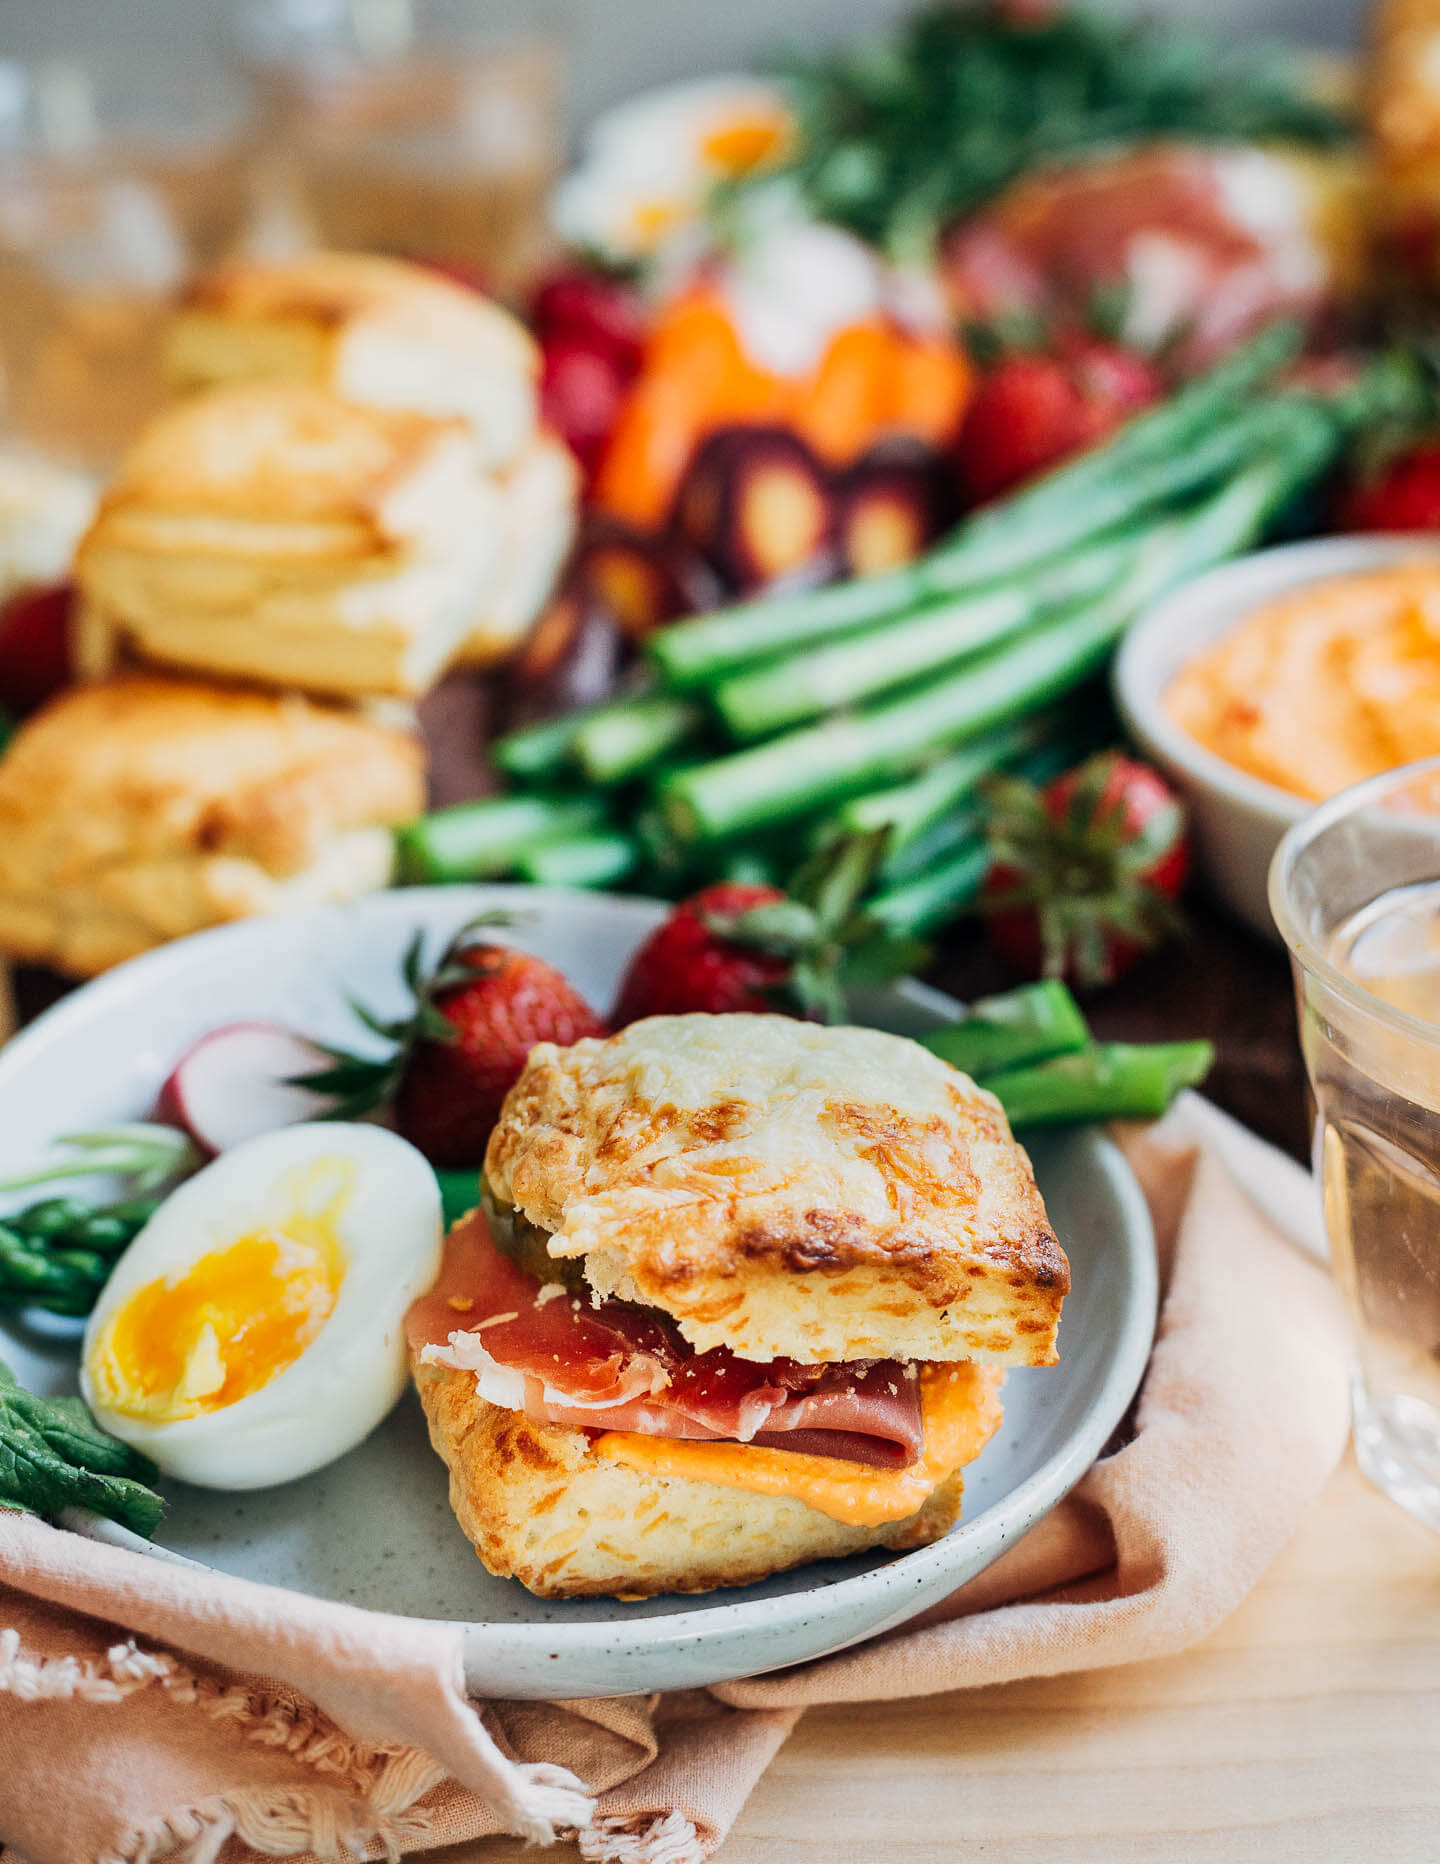 A biscuit sandwich with an egg and asparagus alongside.